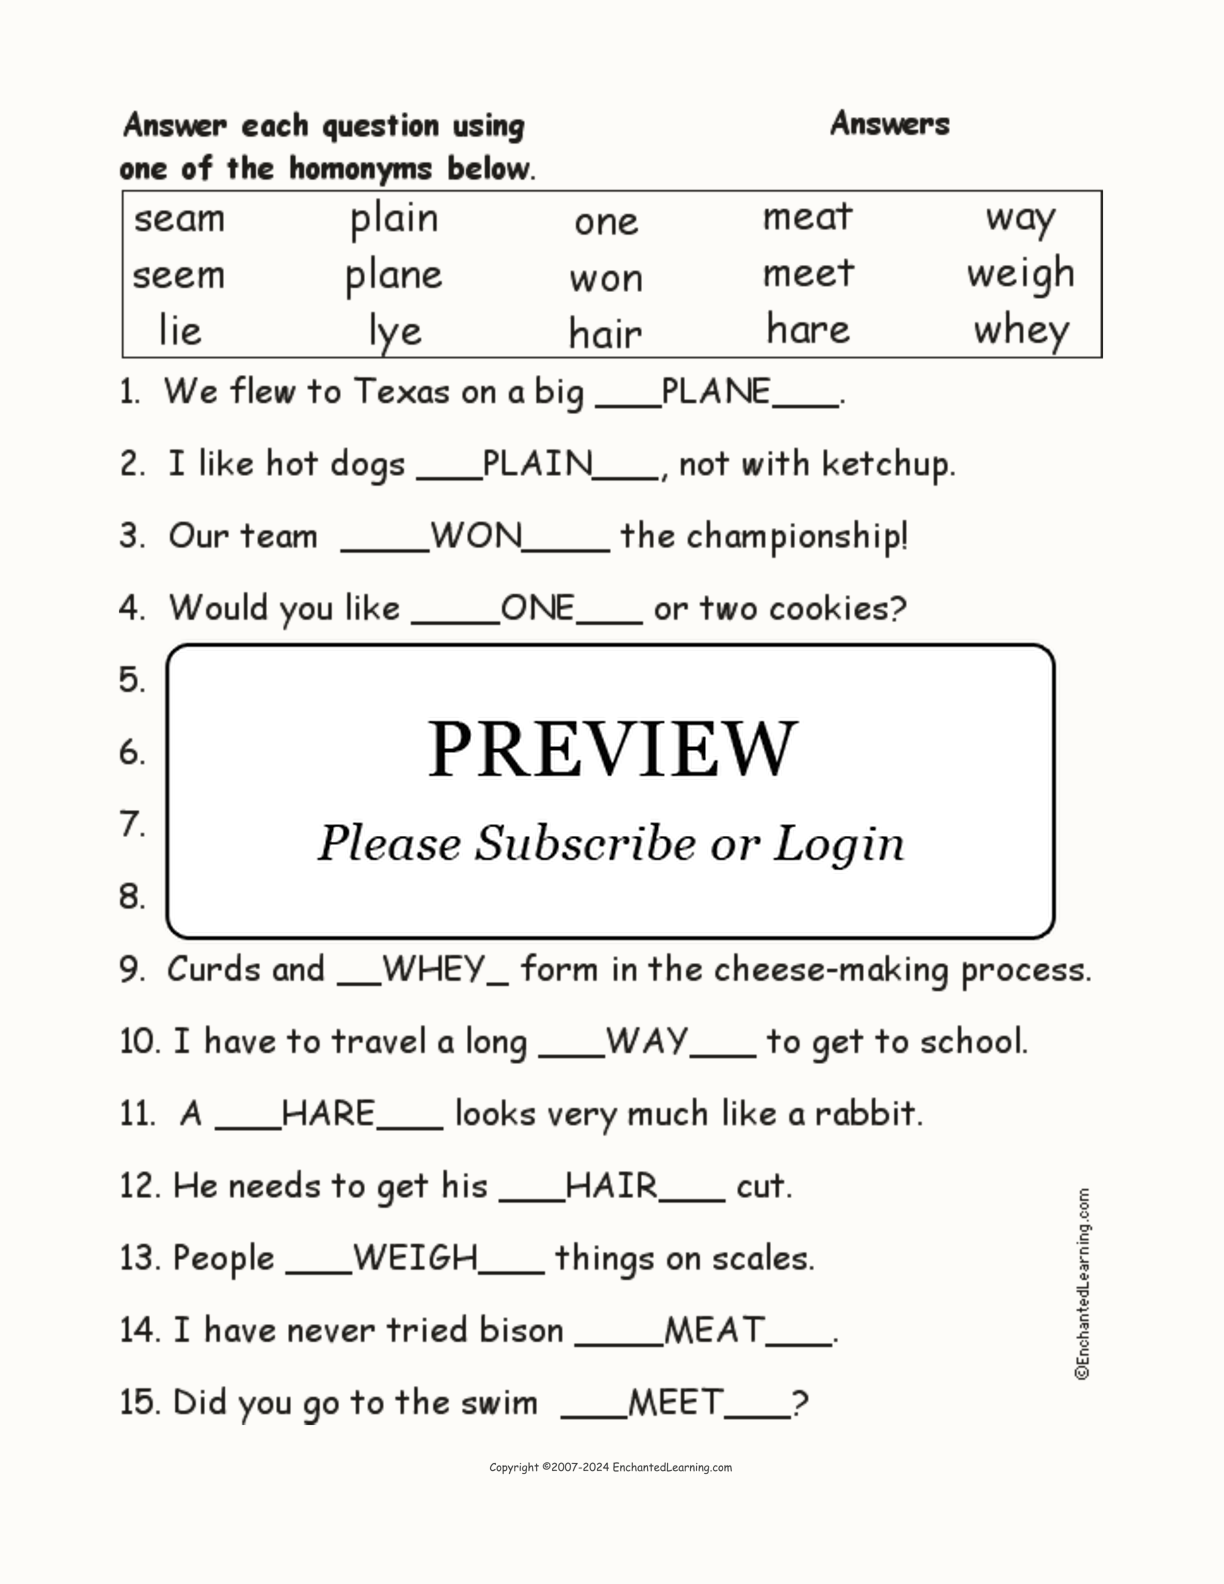 Homonyms Spelling Word Questions #6 interactive worksheet page 2